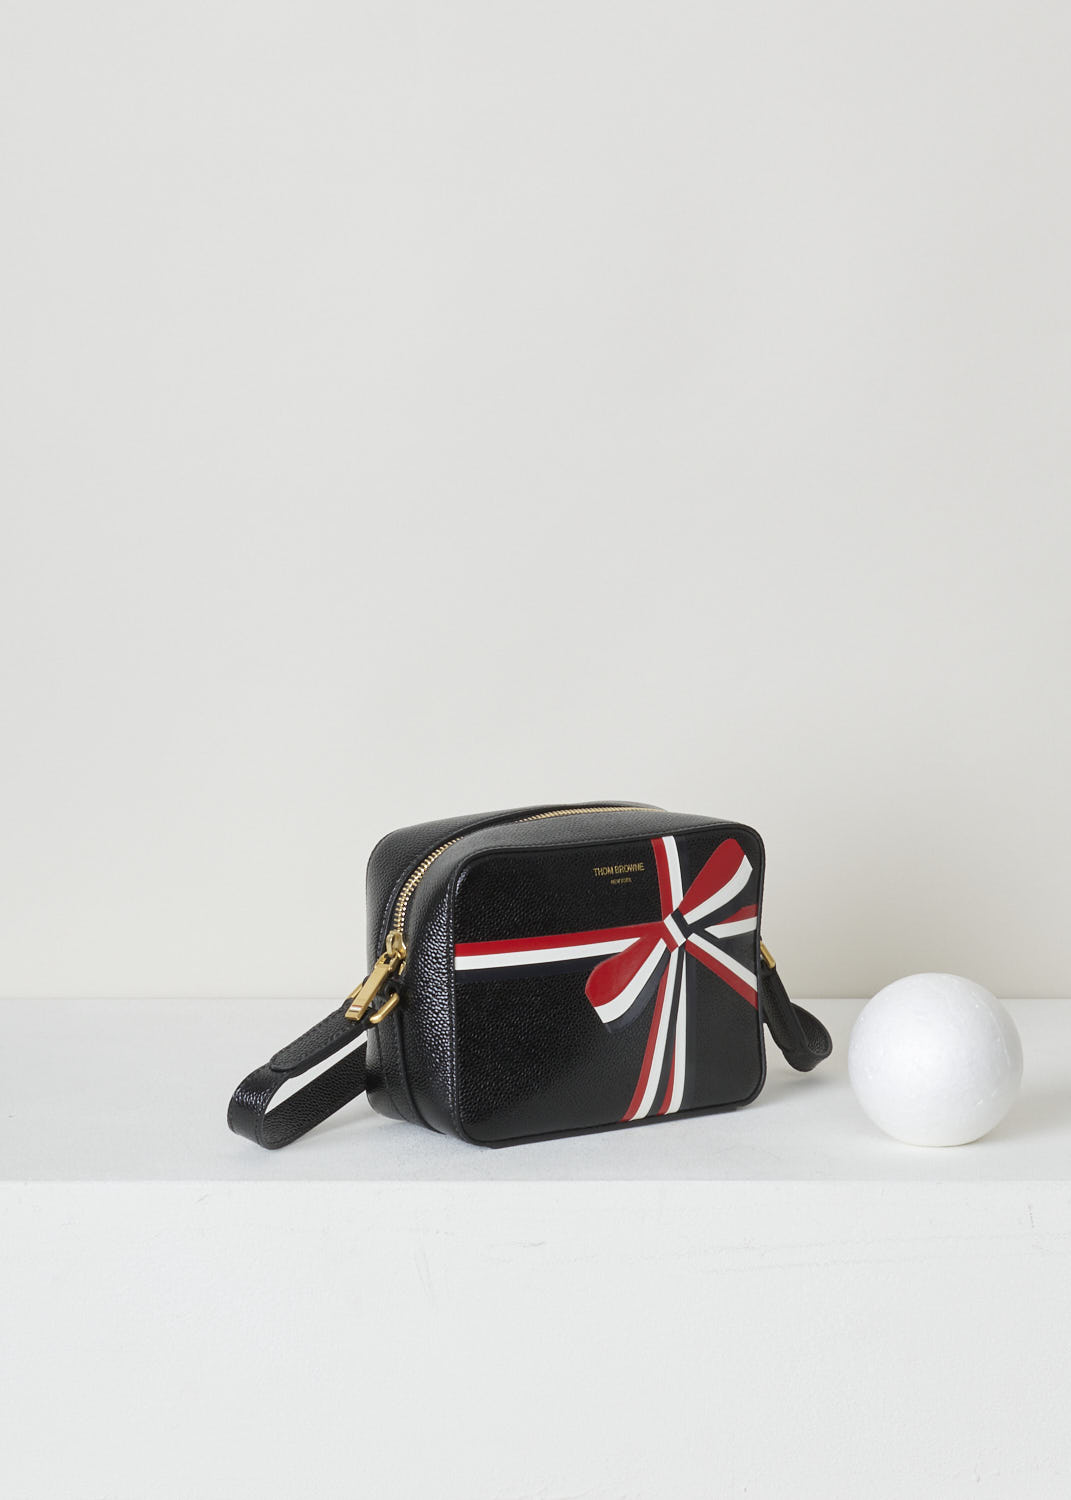 THOM BROWNE, CROSS BODY BAG WITH BOW DETAIL IN THE SIGNATURE TRI-COLOR STRIPE, FAP116A_03542_001, Black, Print, Side, Leather cross body bag with a bow detail in the signature tri-color grosgrain stripe in the front and a single tri-colored tab on the back. This model is made with pebble grain leather. Up top, a gold-toned zipper gives access to the interior of the bag. The bag opens up to a single spacious compartment with on one side, a single patch pocket against the back wall. 


Size: 17 cm x 13 cm x 7 cm / 6.6 inch x 5.1 inch x 2.7 inch 
